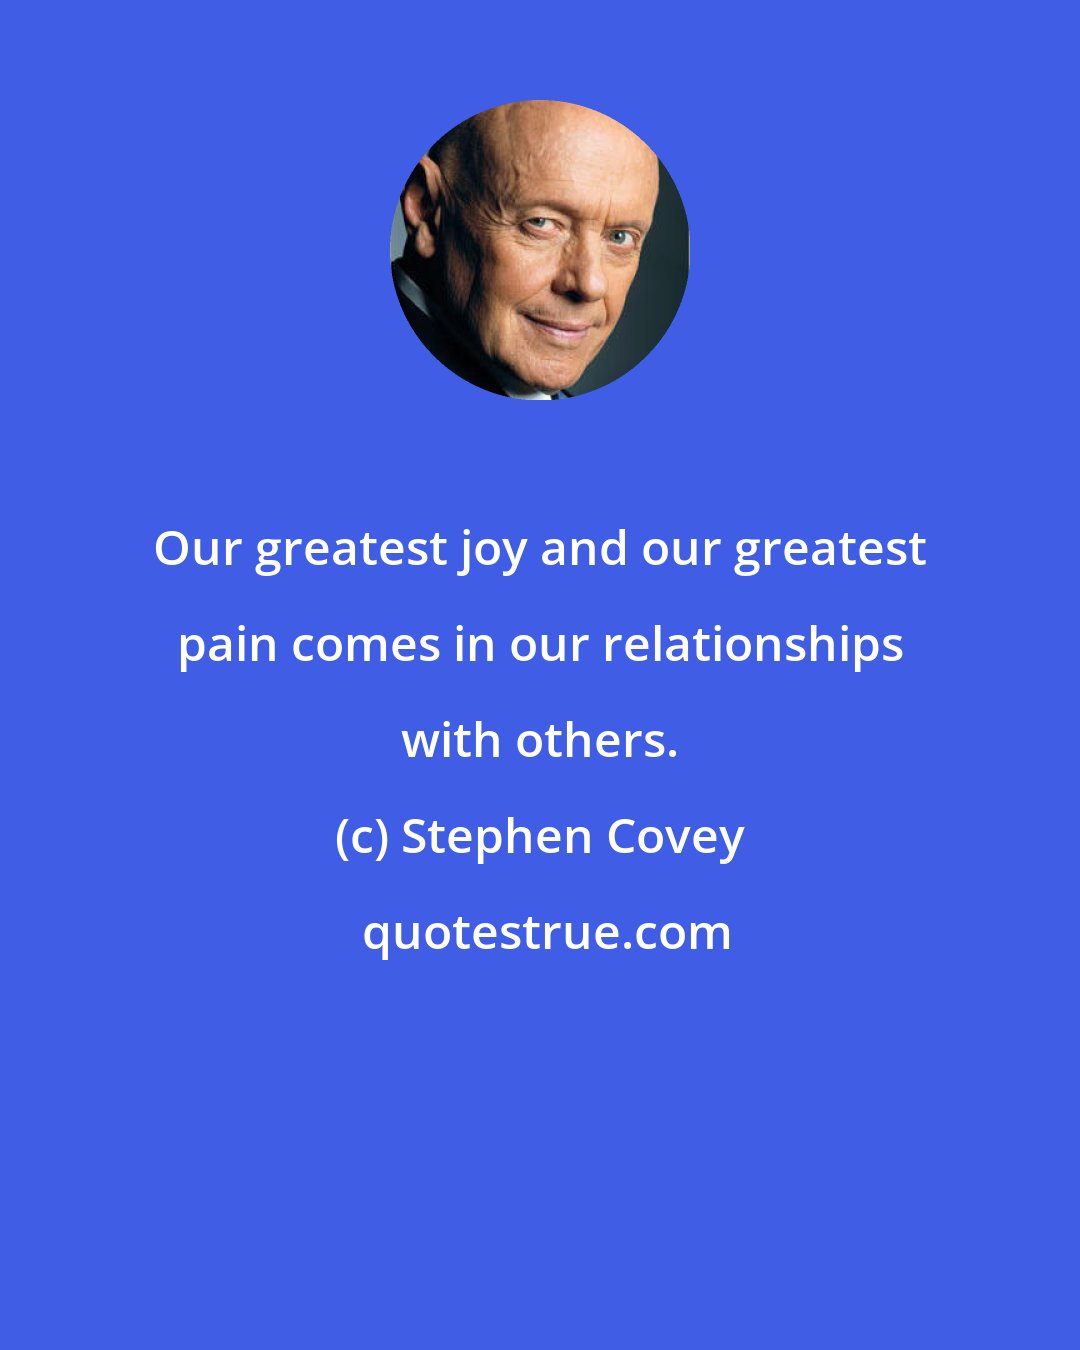 Stephen Covey: Our greatest joy and our greatest pain comes in our relationships with others.